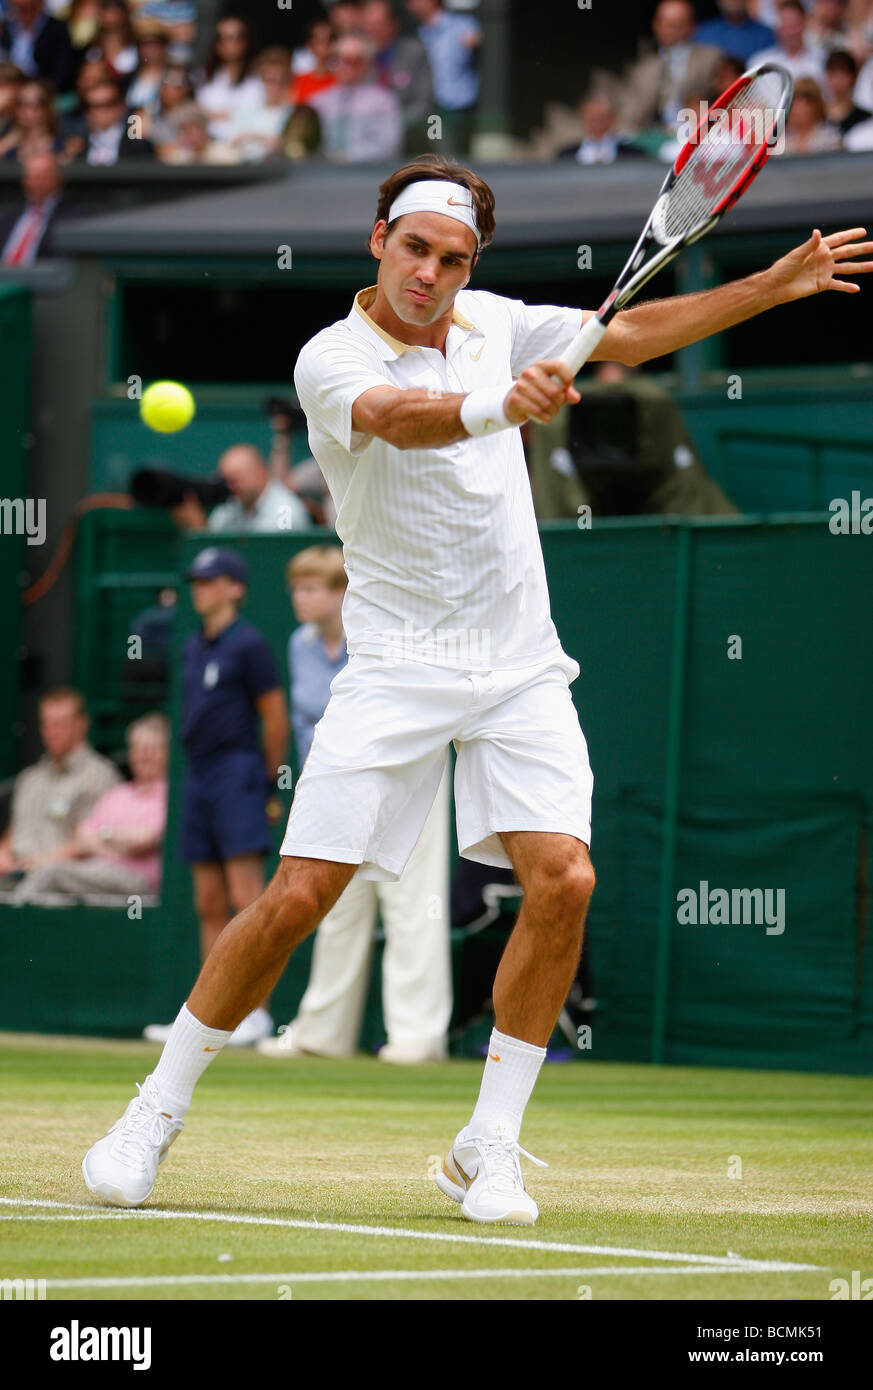 Wimbledon Championships 2009, Roger Federer SUI in Aktion Stockfoto